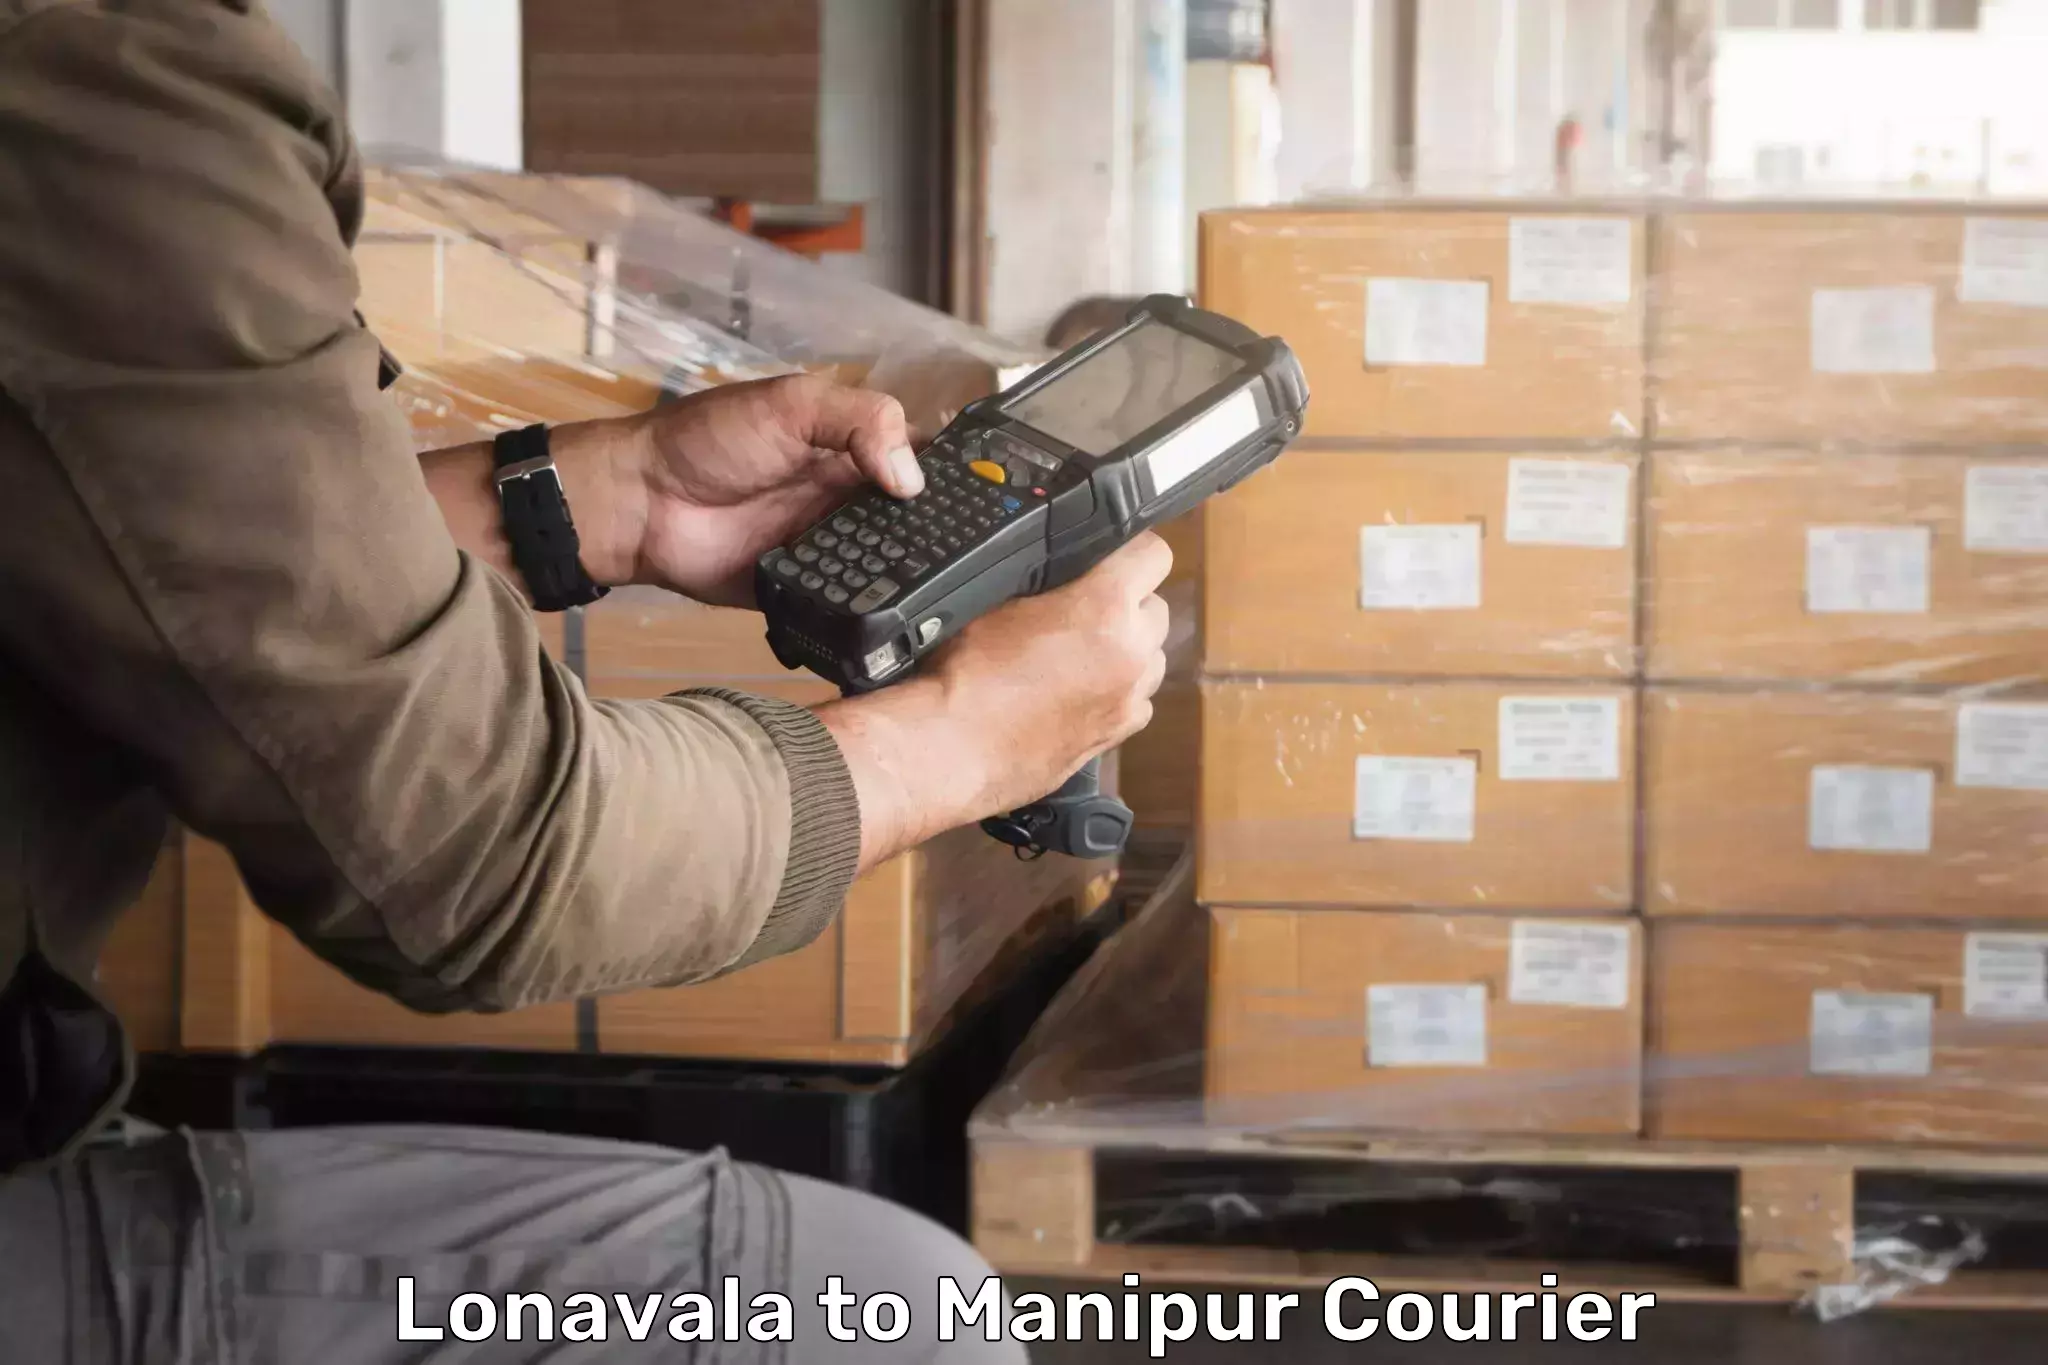 International courier networks Lonavala to Imphal